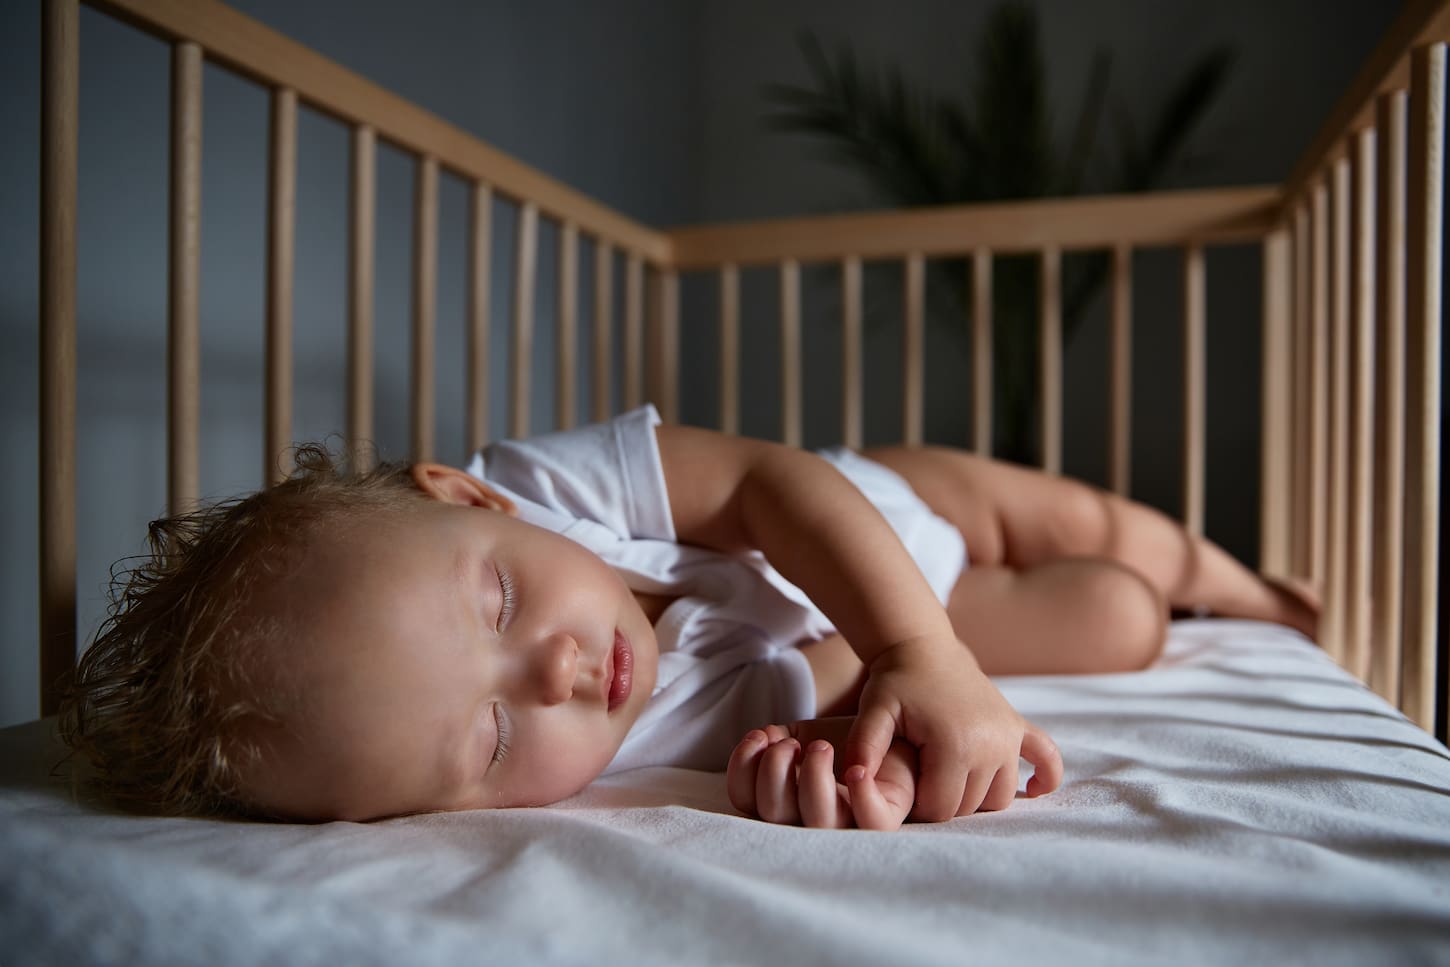 An image of a Cute baby sleeping at night in a cradle for babies without a canopy and bumpers.